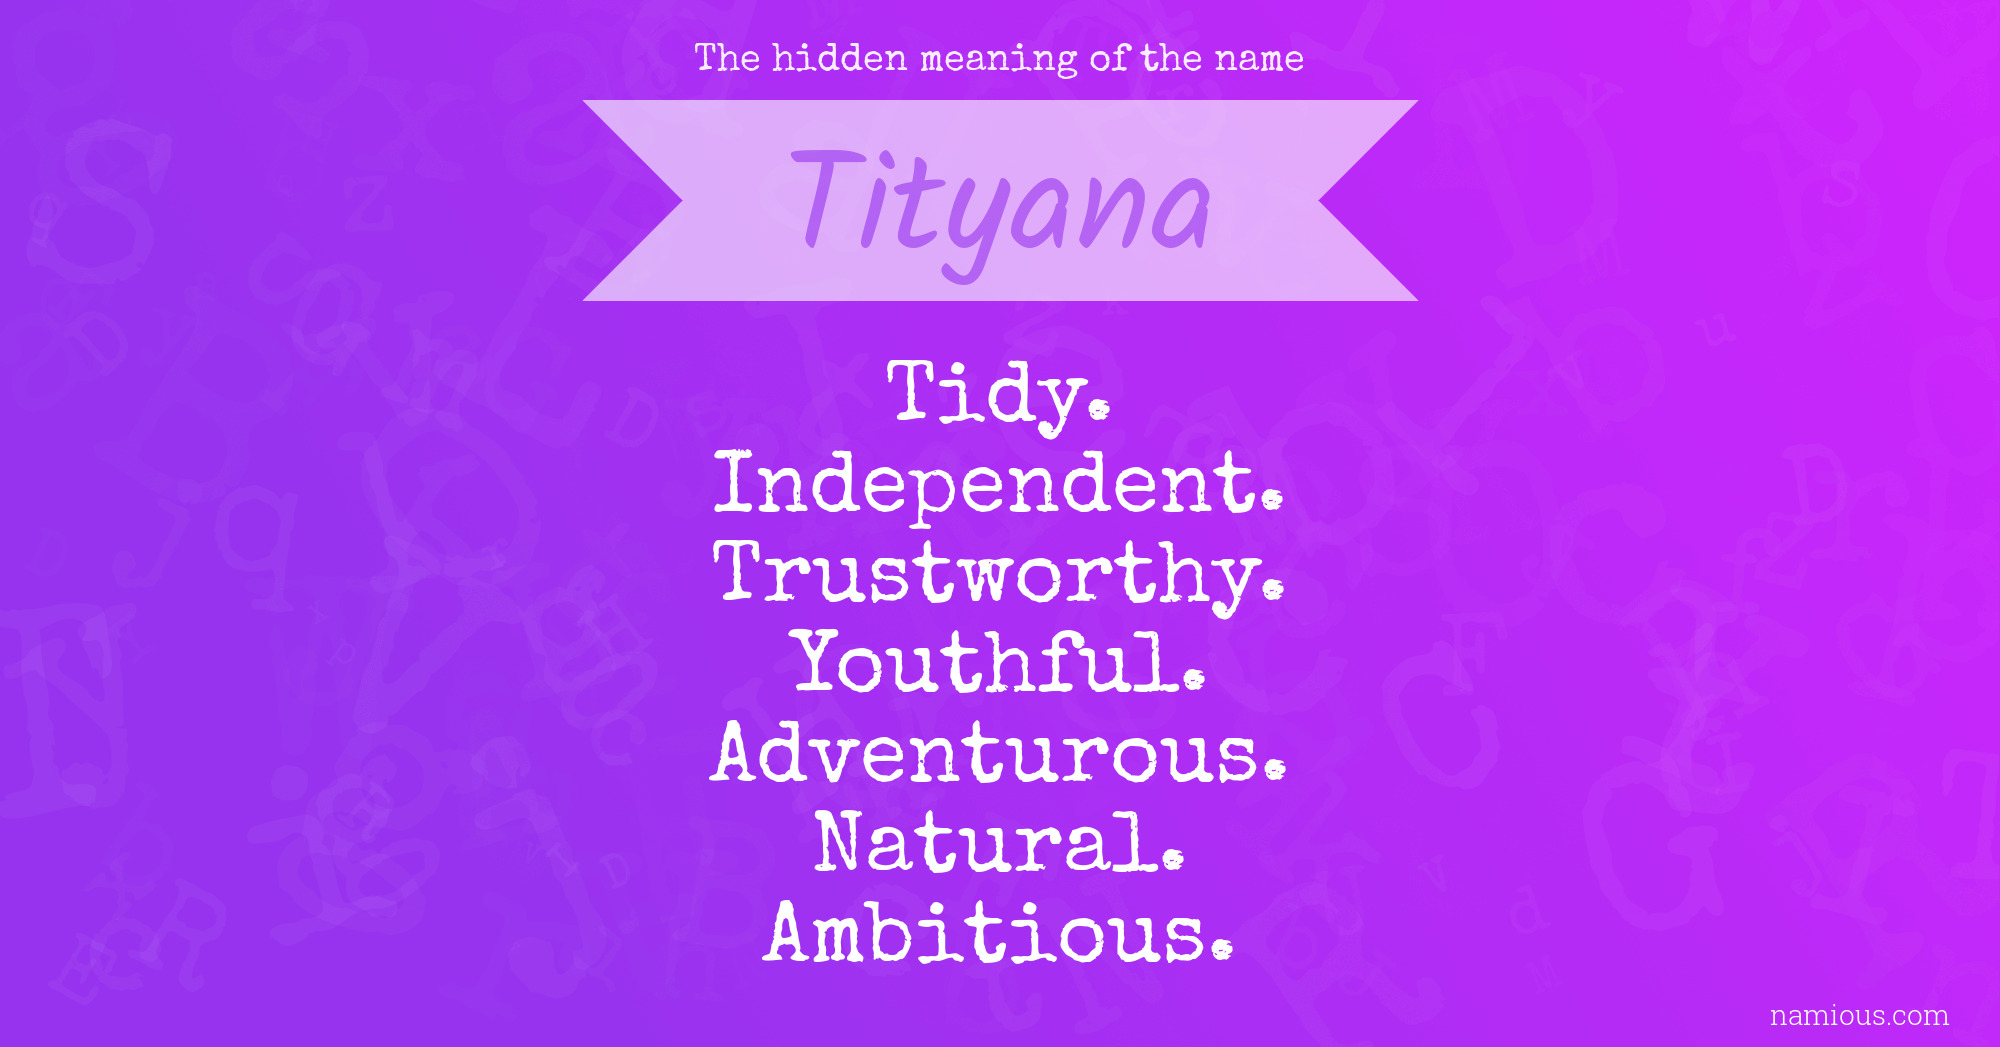 The hidden meaning of the name Tityana